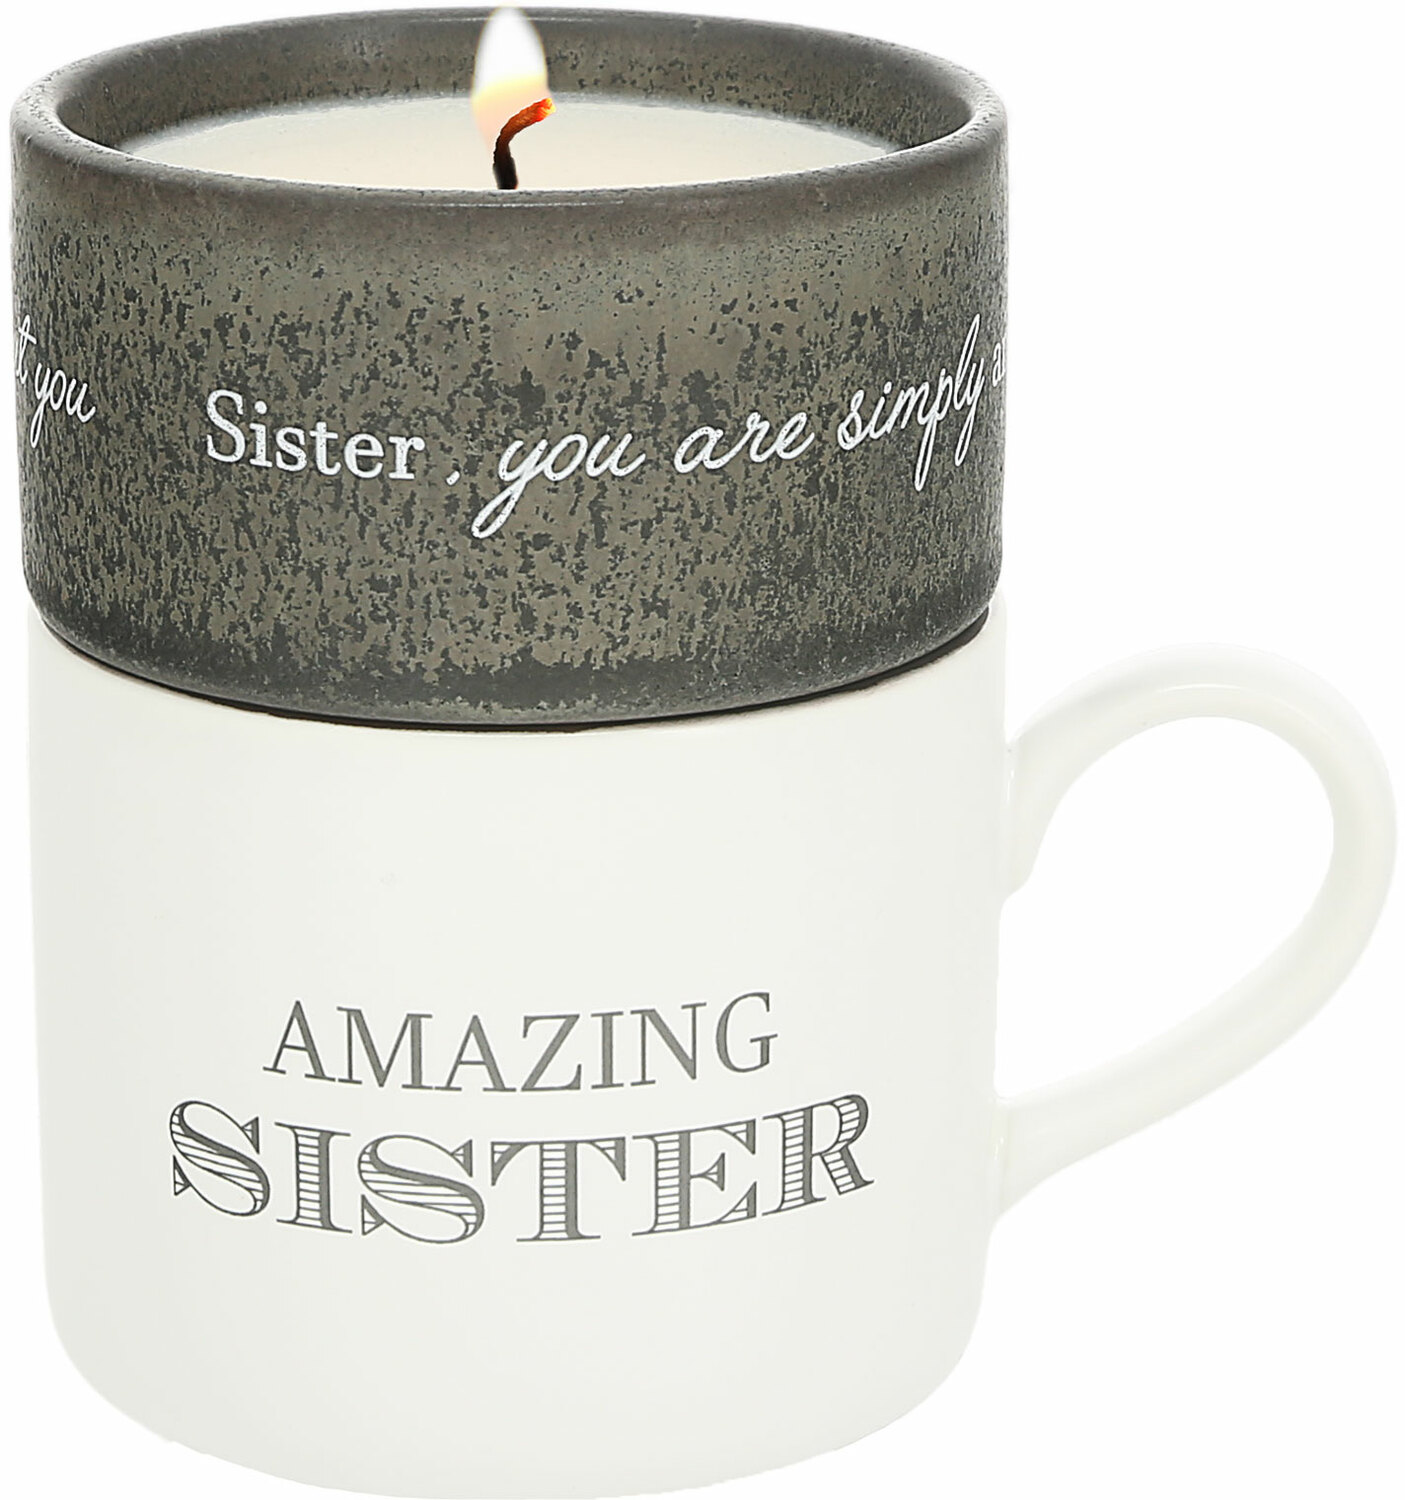 Sister by Filled with Warmth - Sister - Stacking Mug and Candle Set
100% Soy Wax Scent: Tranquility